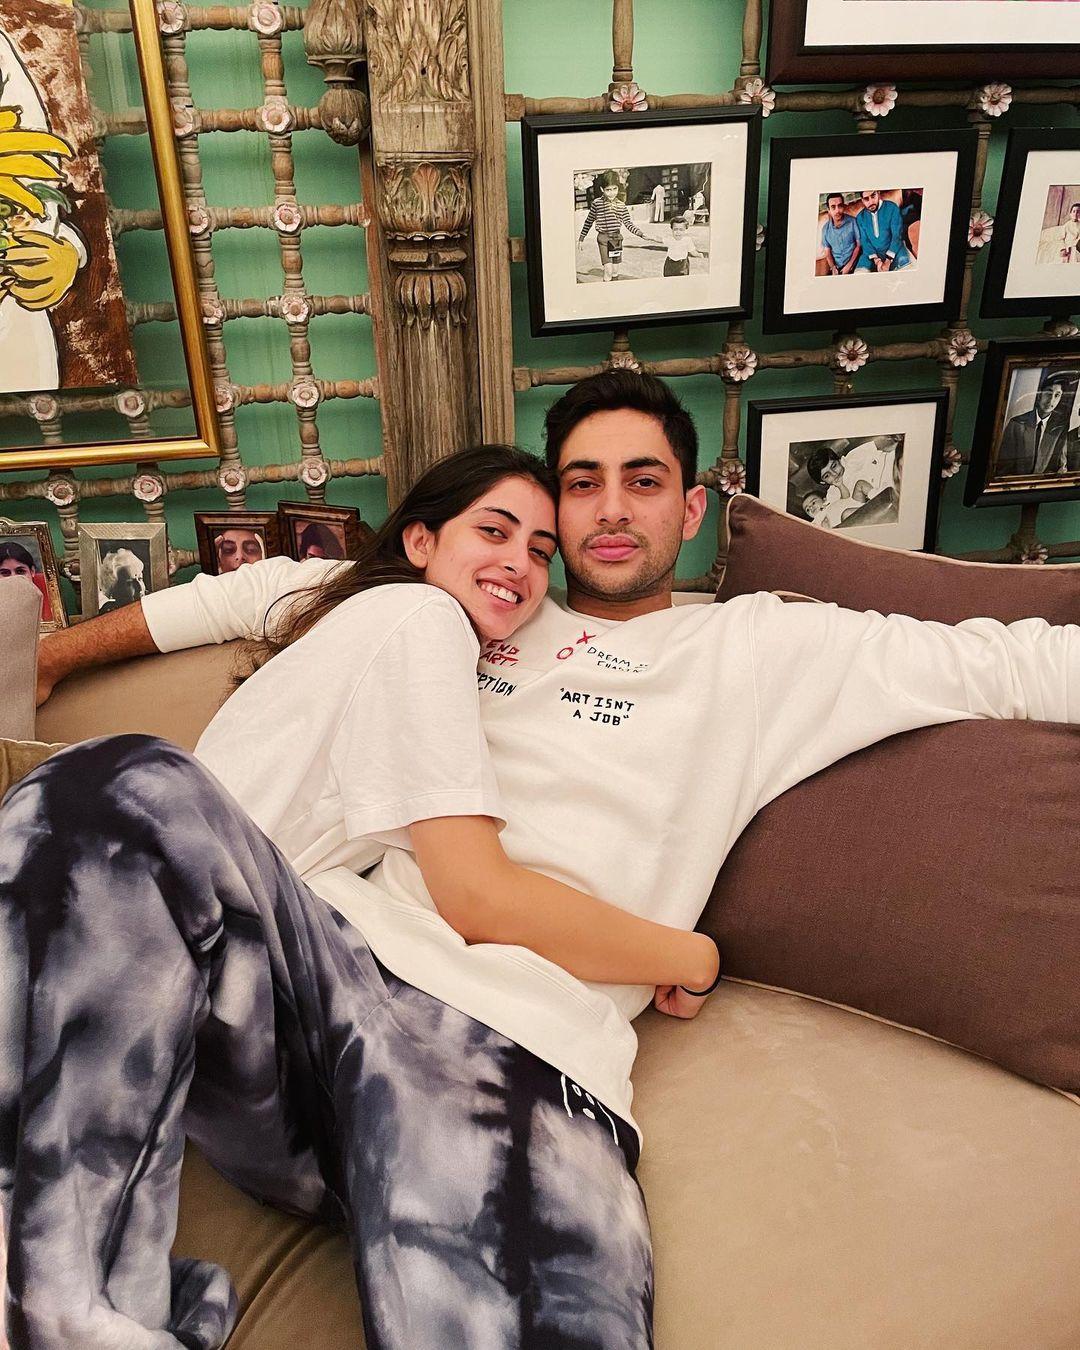 Agastya Nanda, who recently made his acting debut with Archies, never misses a chance to praise his sister Navya Nanda. He also made an appearance on Navya's podcast